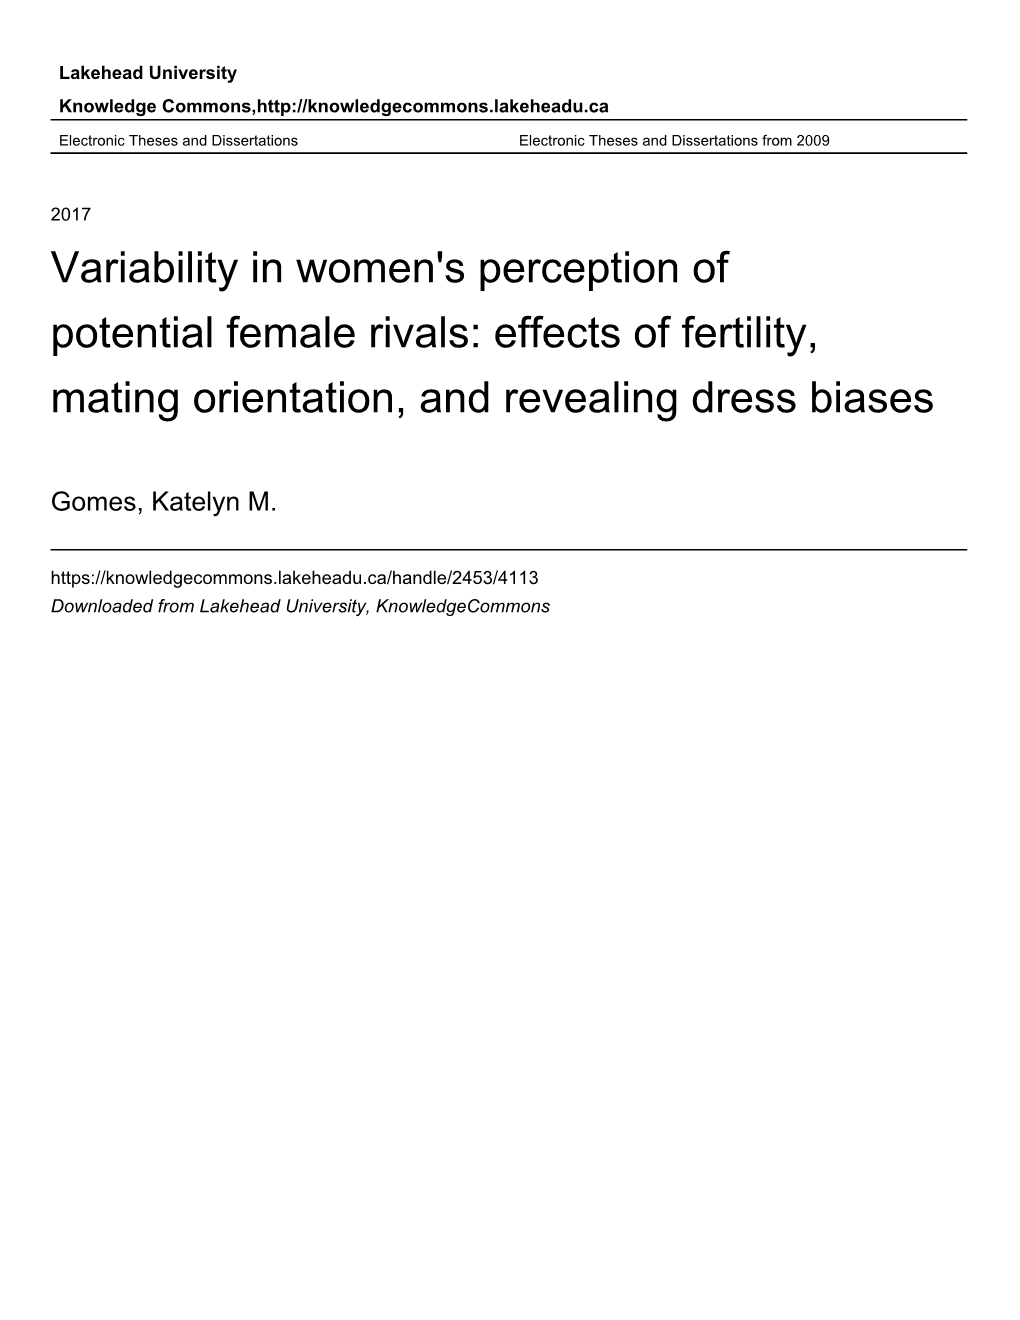 Effects of Fertility, Mating Orientation, and Revealing Dress Biases